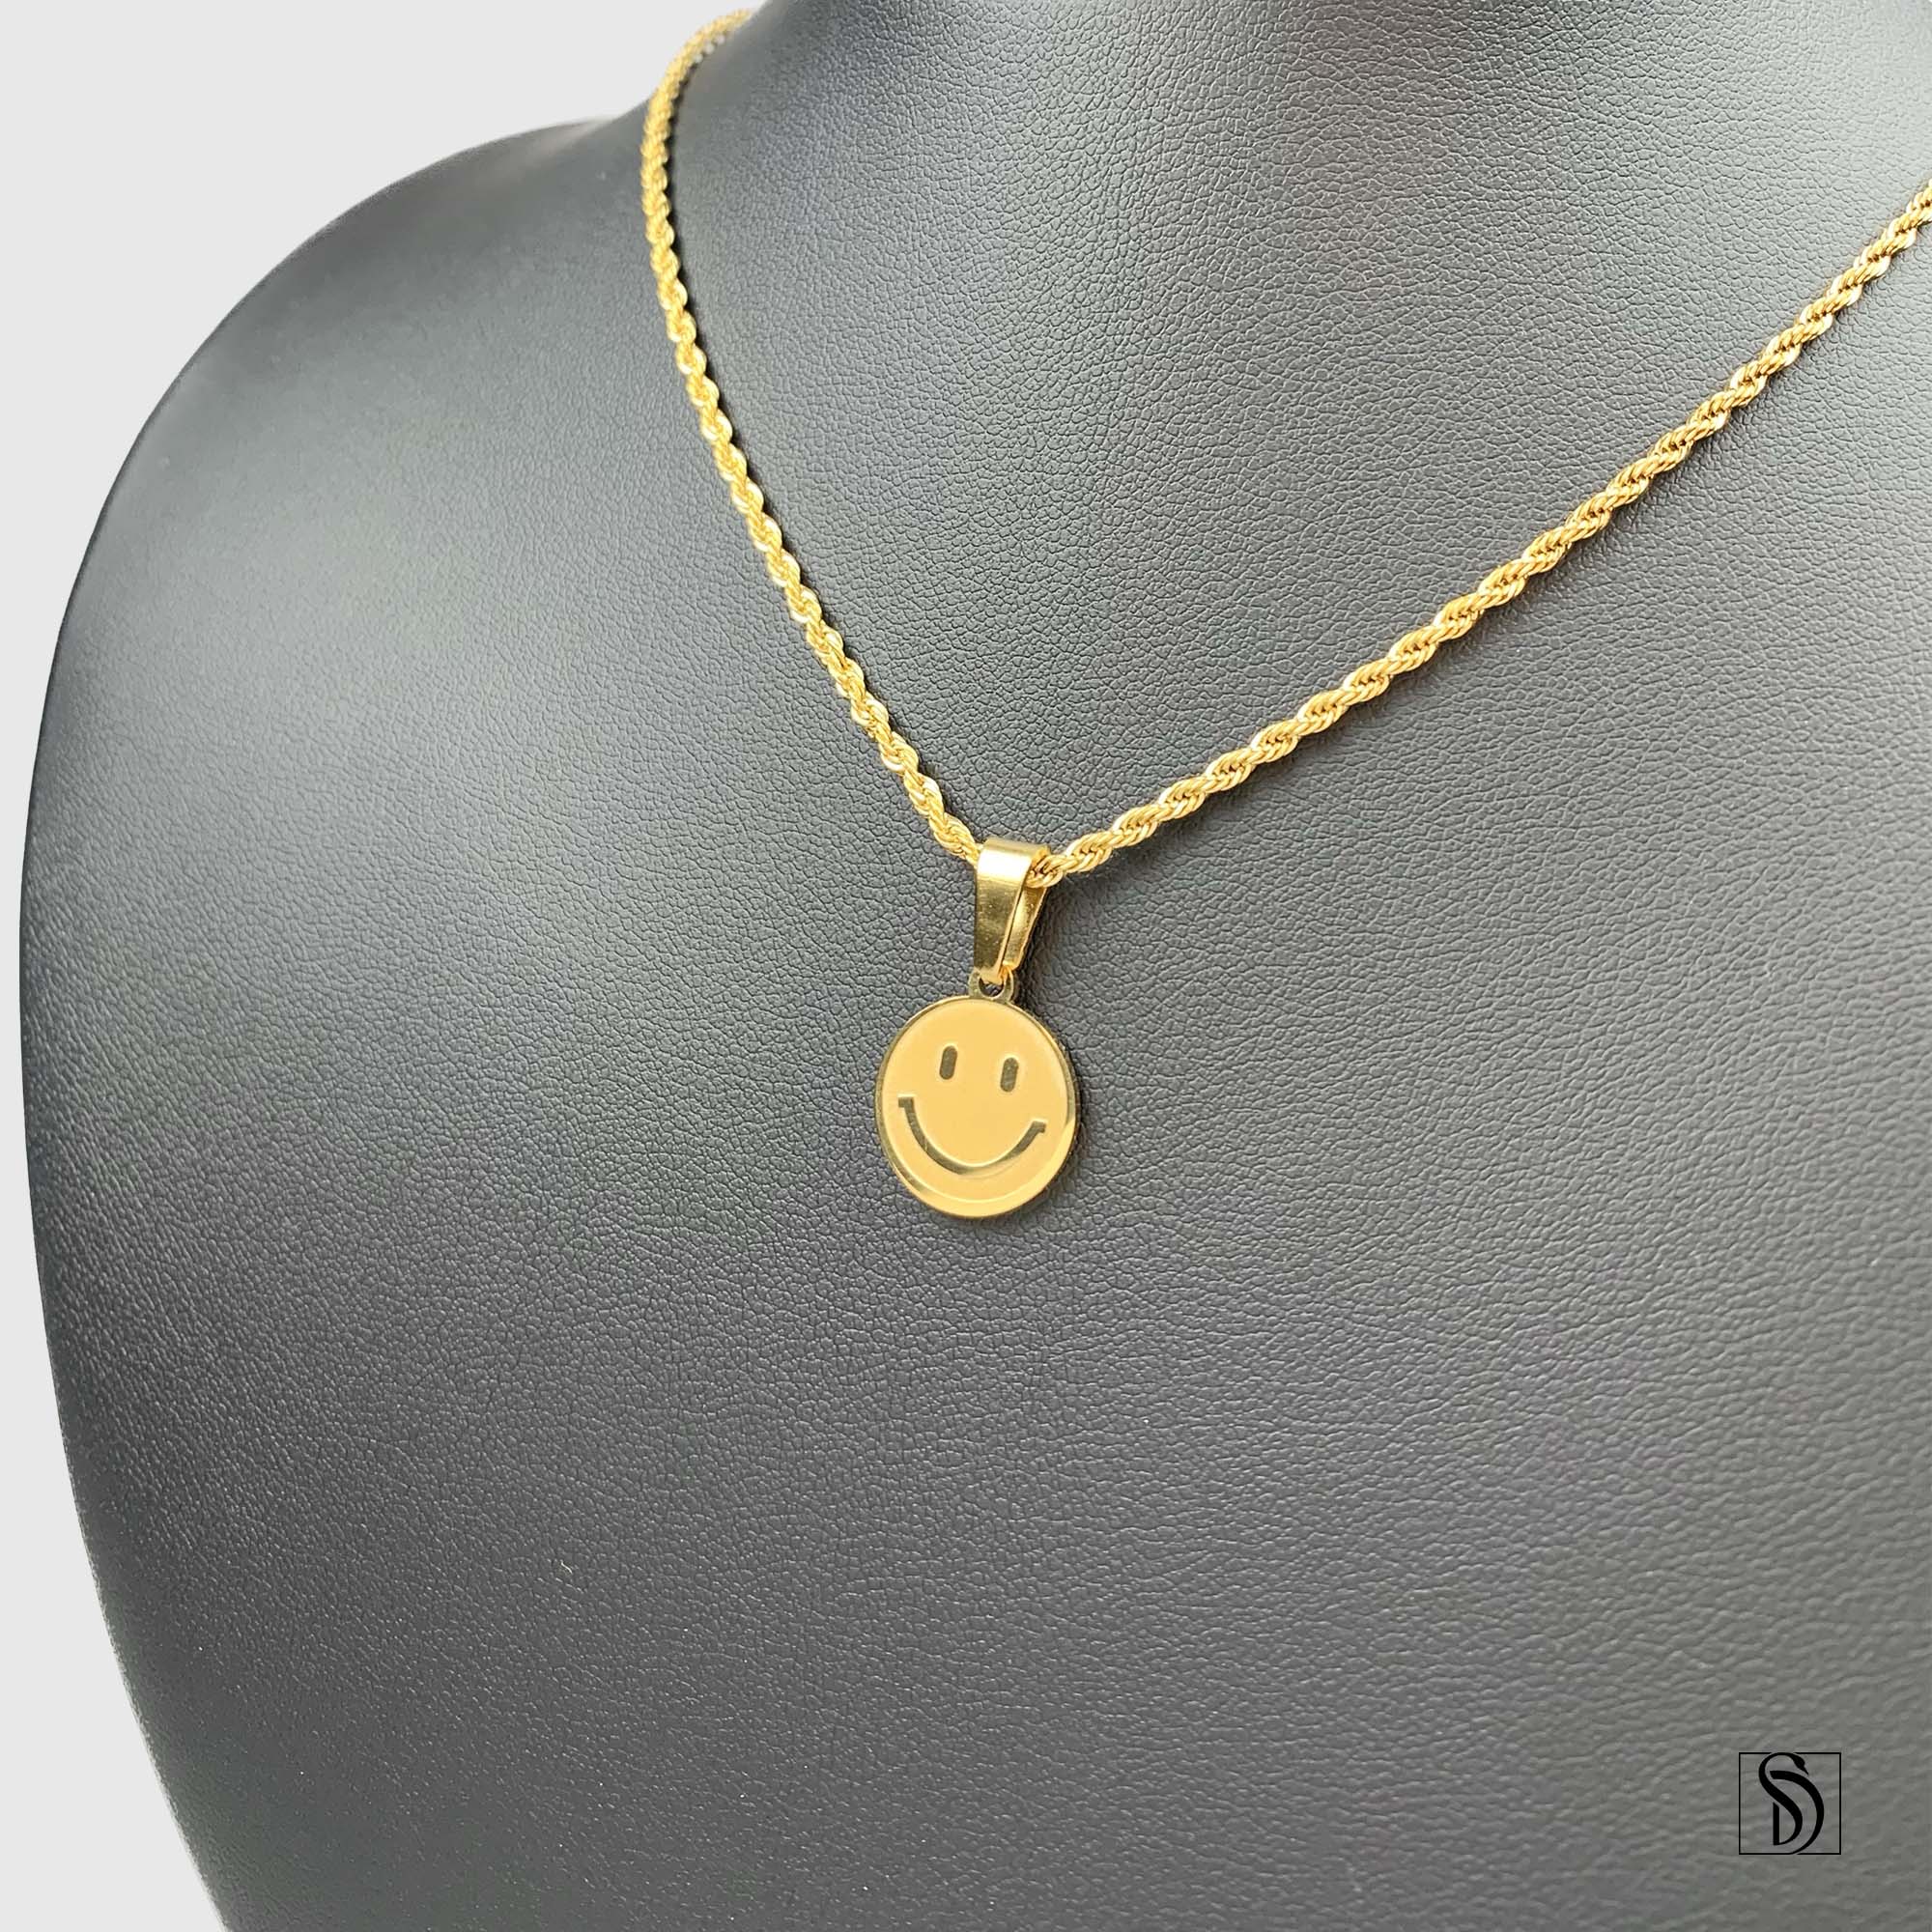 Smiley Face Pendant Necklace Sterling Silver Gold – Hey Happiness